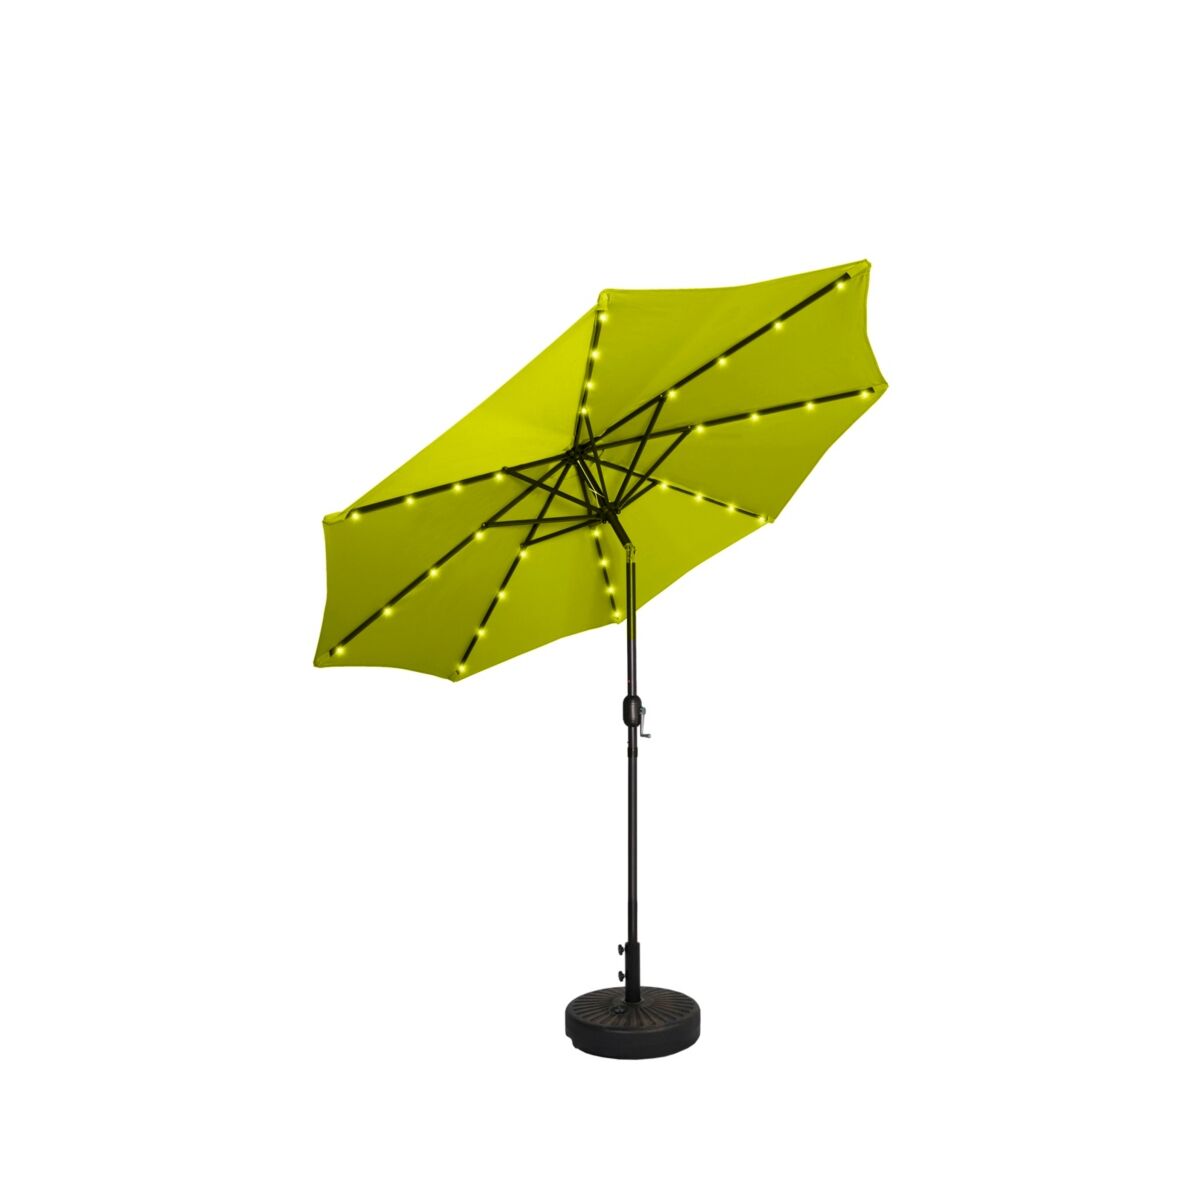 WestinTrends 9 ft. Patio Solar Power Led lights Market Umbrella with Bronze Round Base - Lime Green